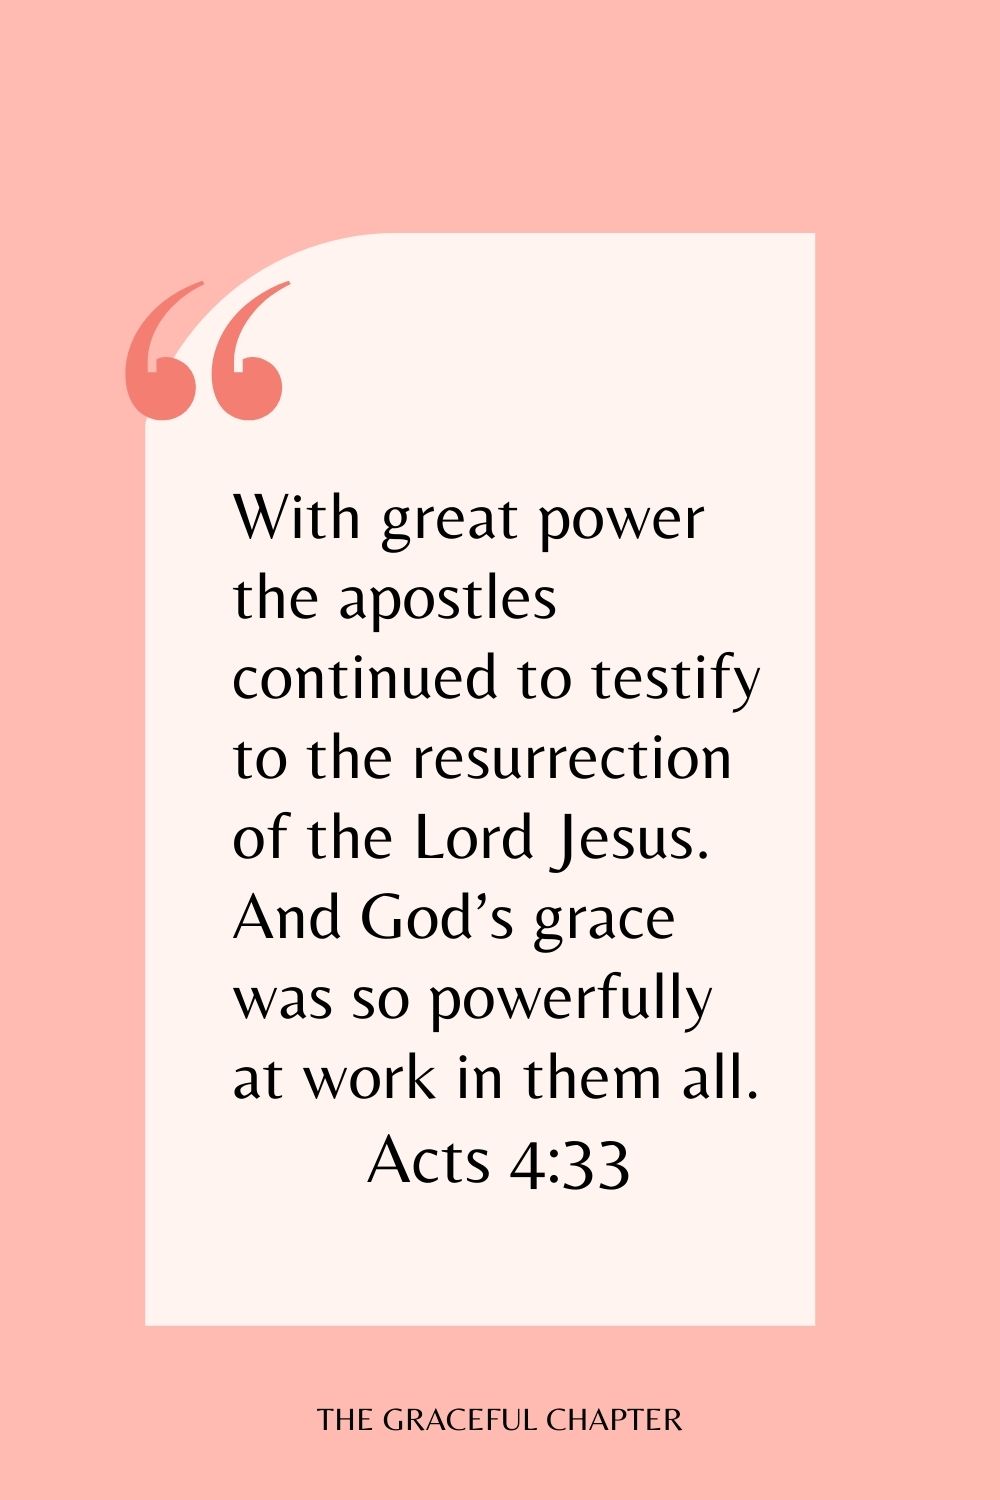 With great power the apostles continued to testify to the resurrection of the Lord Jesus. And God’s grace was so powerfully at work in them all. Acts 4:33